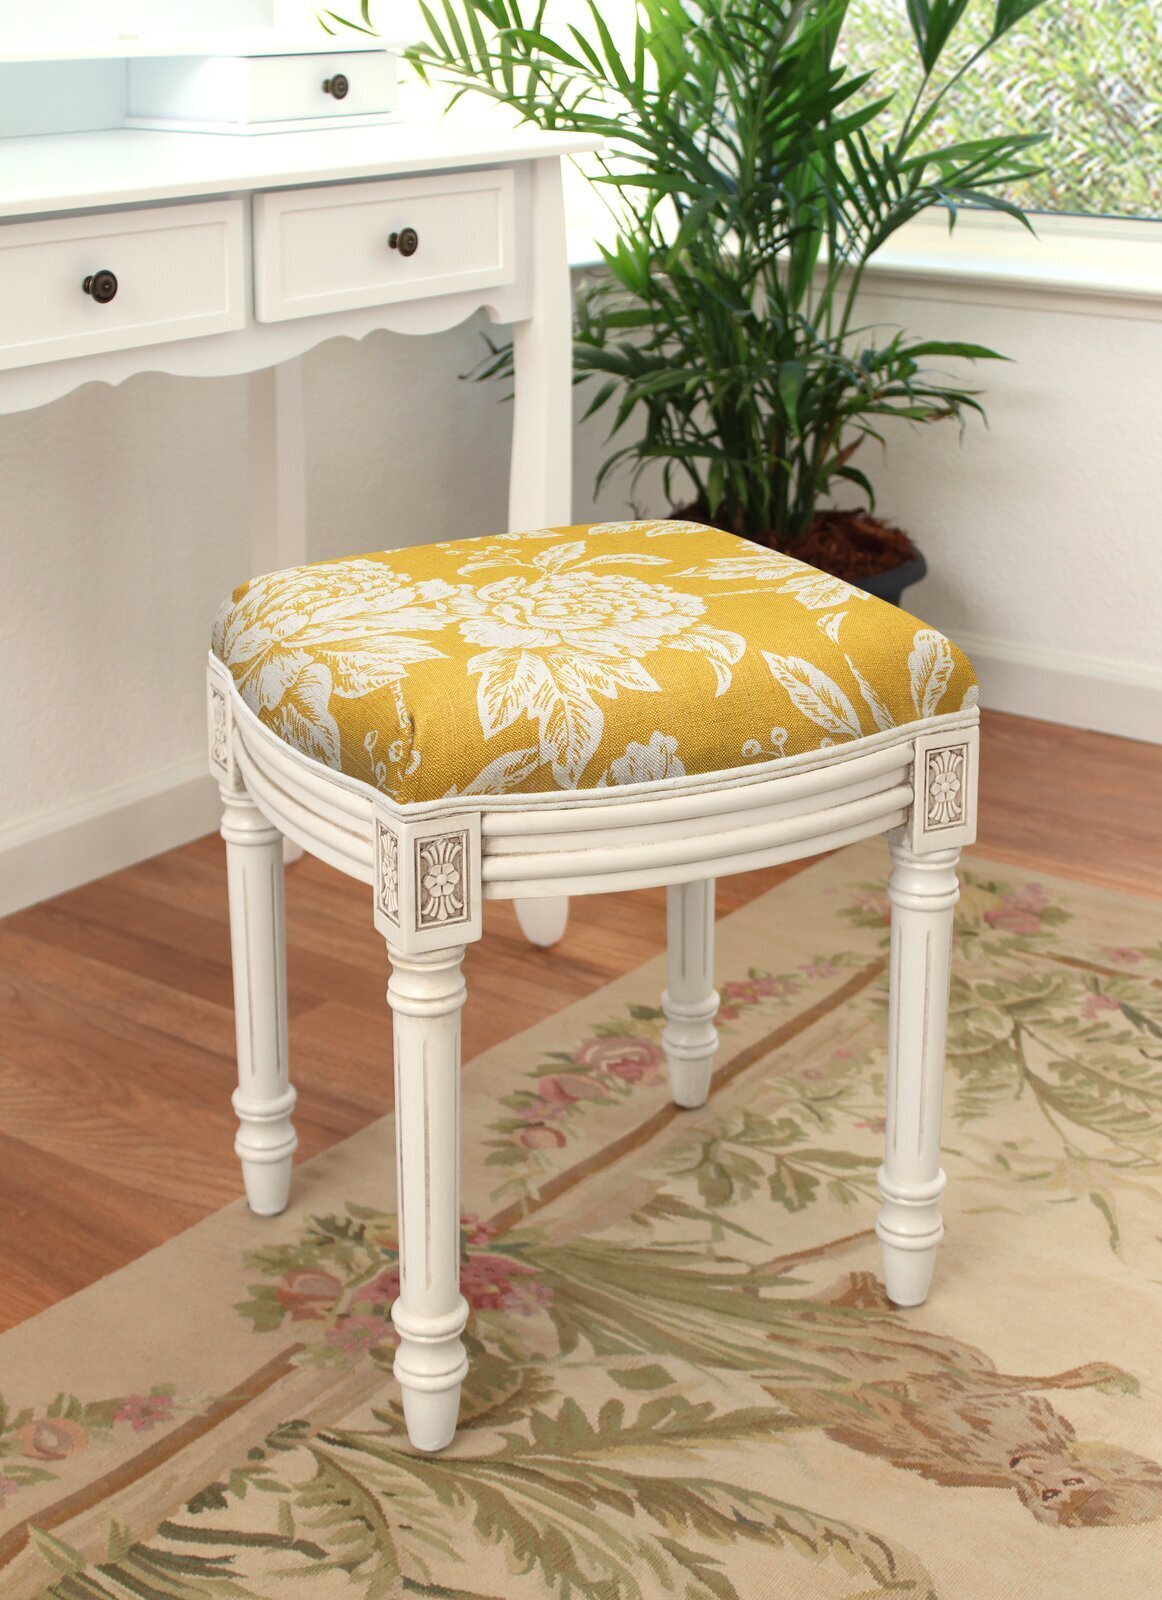 Vintage Piano Stool with Floral Decorative Seat